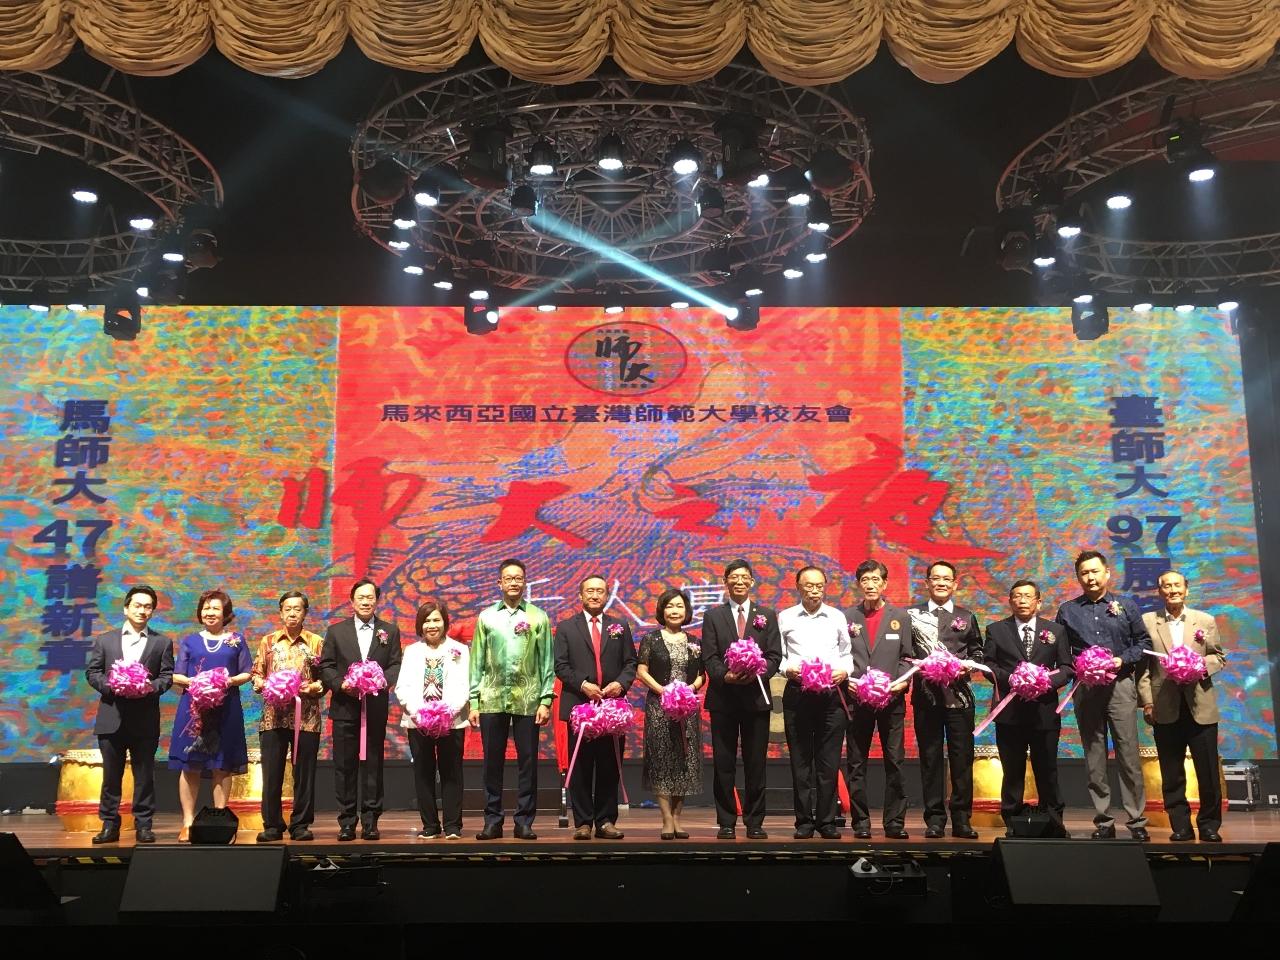 Representative Anne Hung (eighth from right) attends the opening ceremony “Thousand People” anniversary dinner hosted by National Taiwan Normal University Alumni Association, Malaysia.